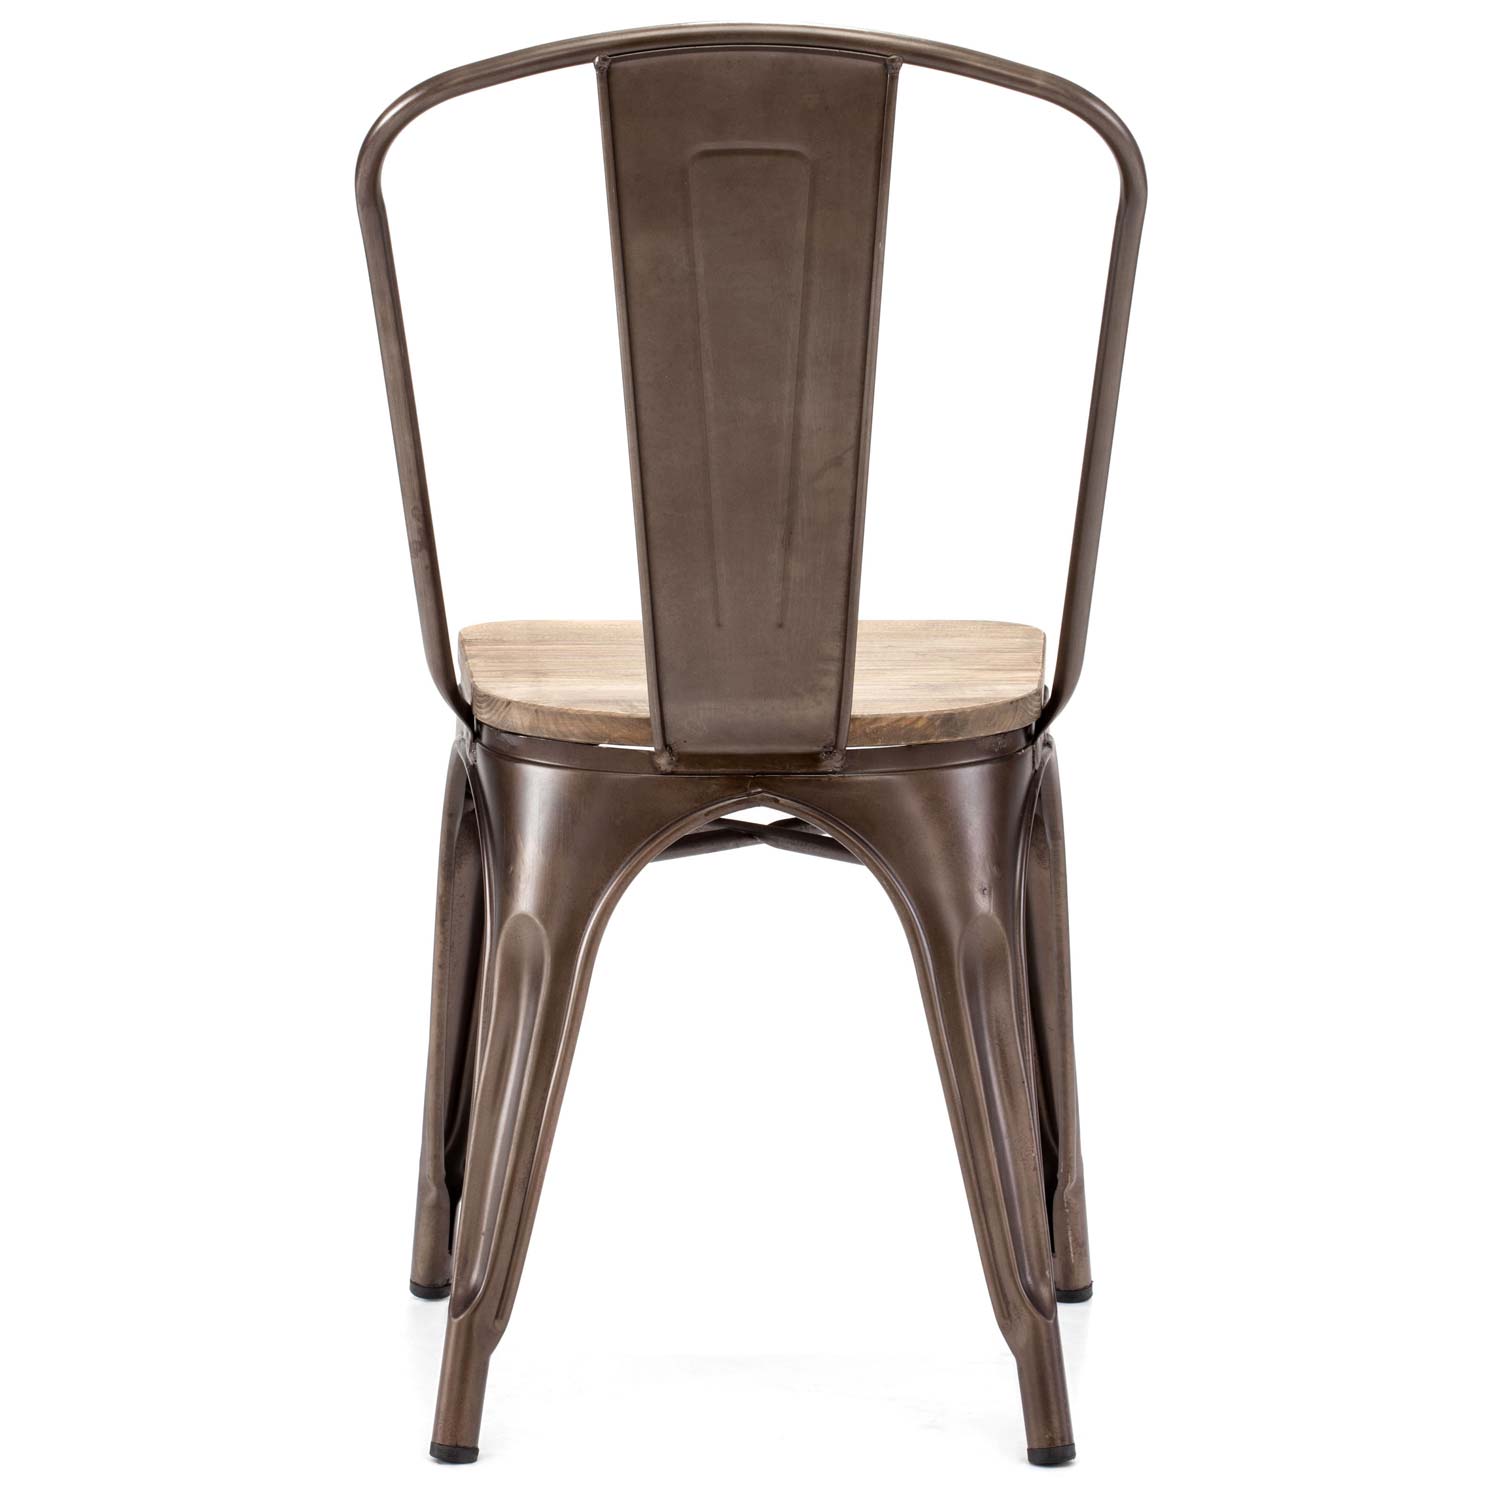 Elio Dining Chair Steel, Faux Rust, Wood Seat DCG Stores